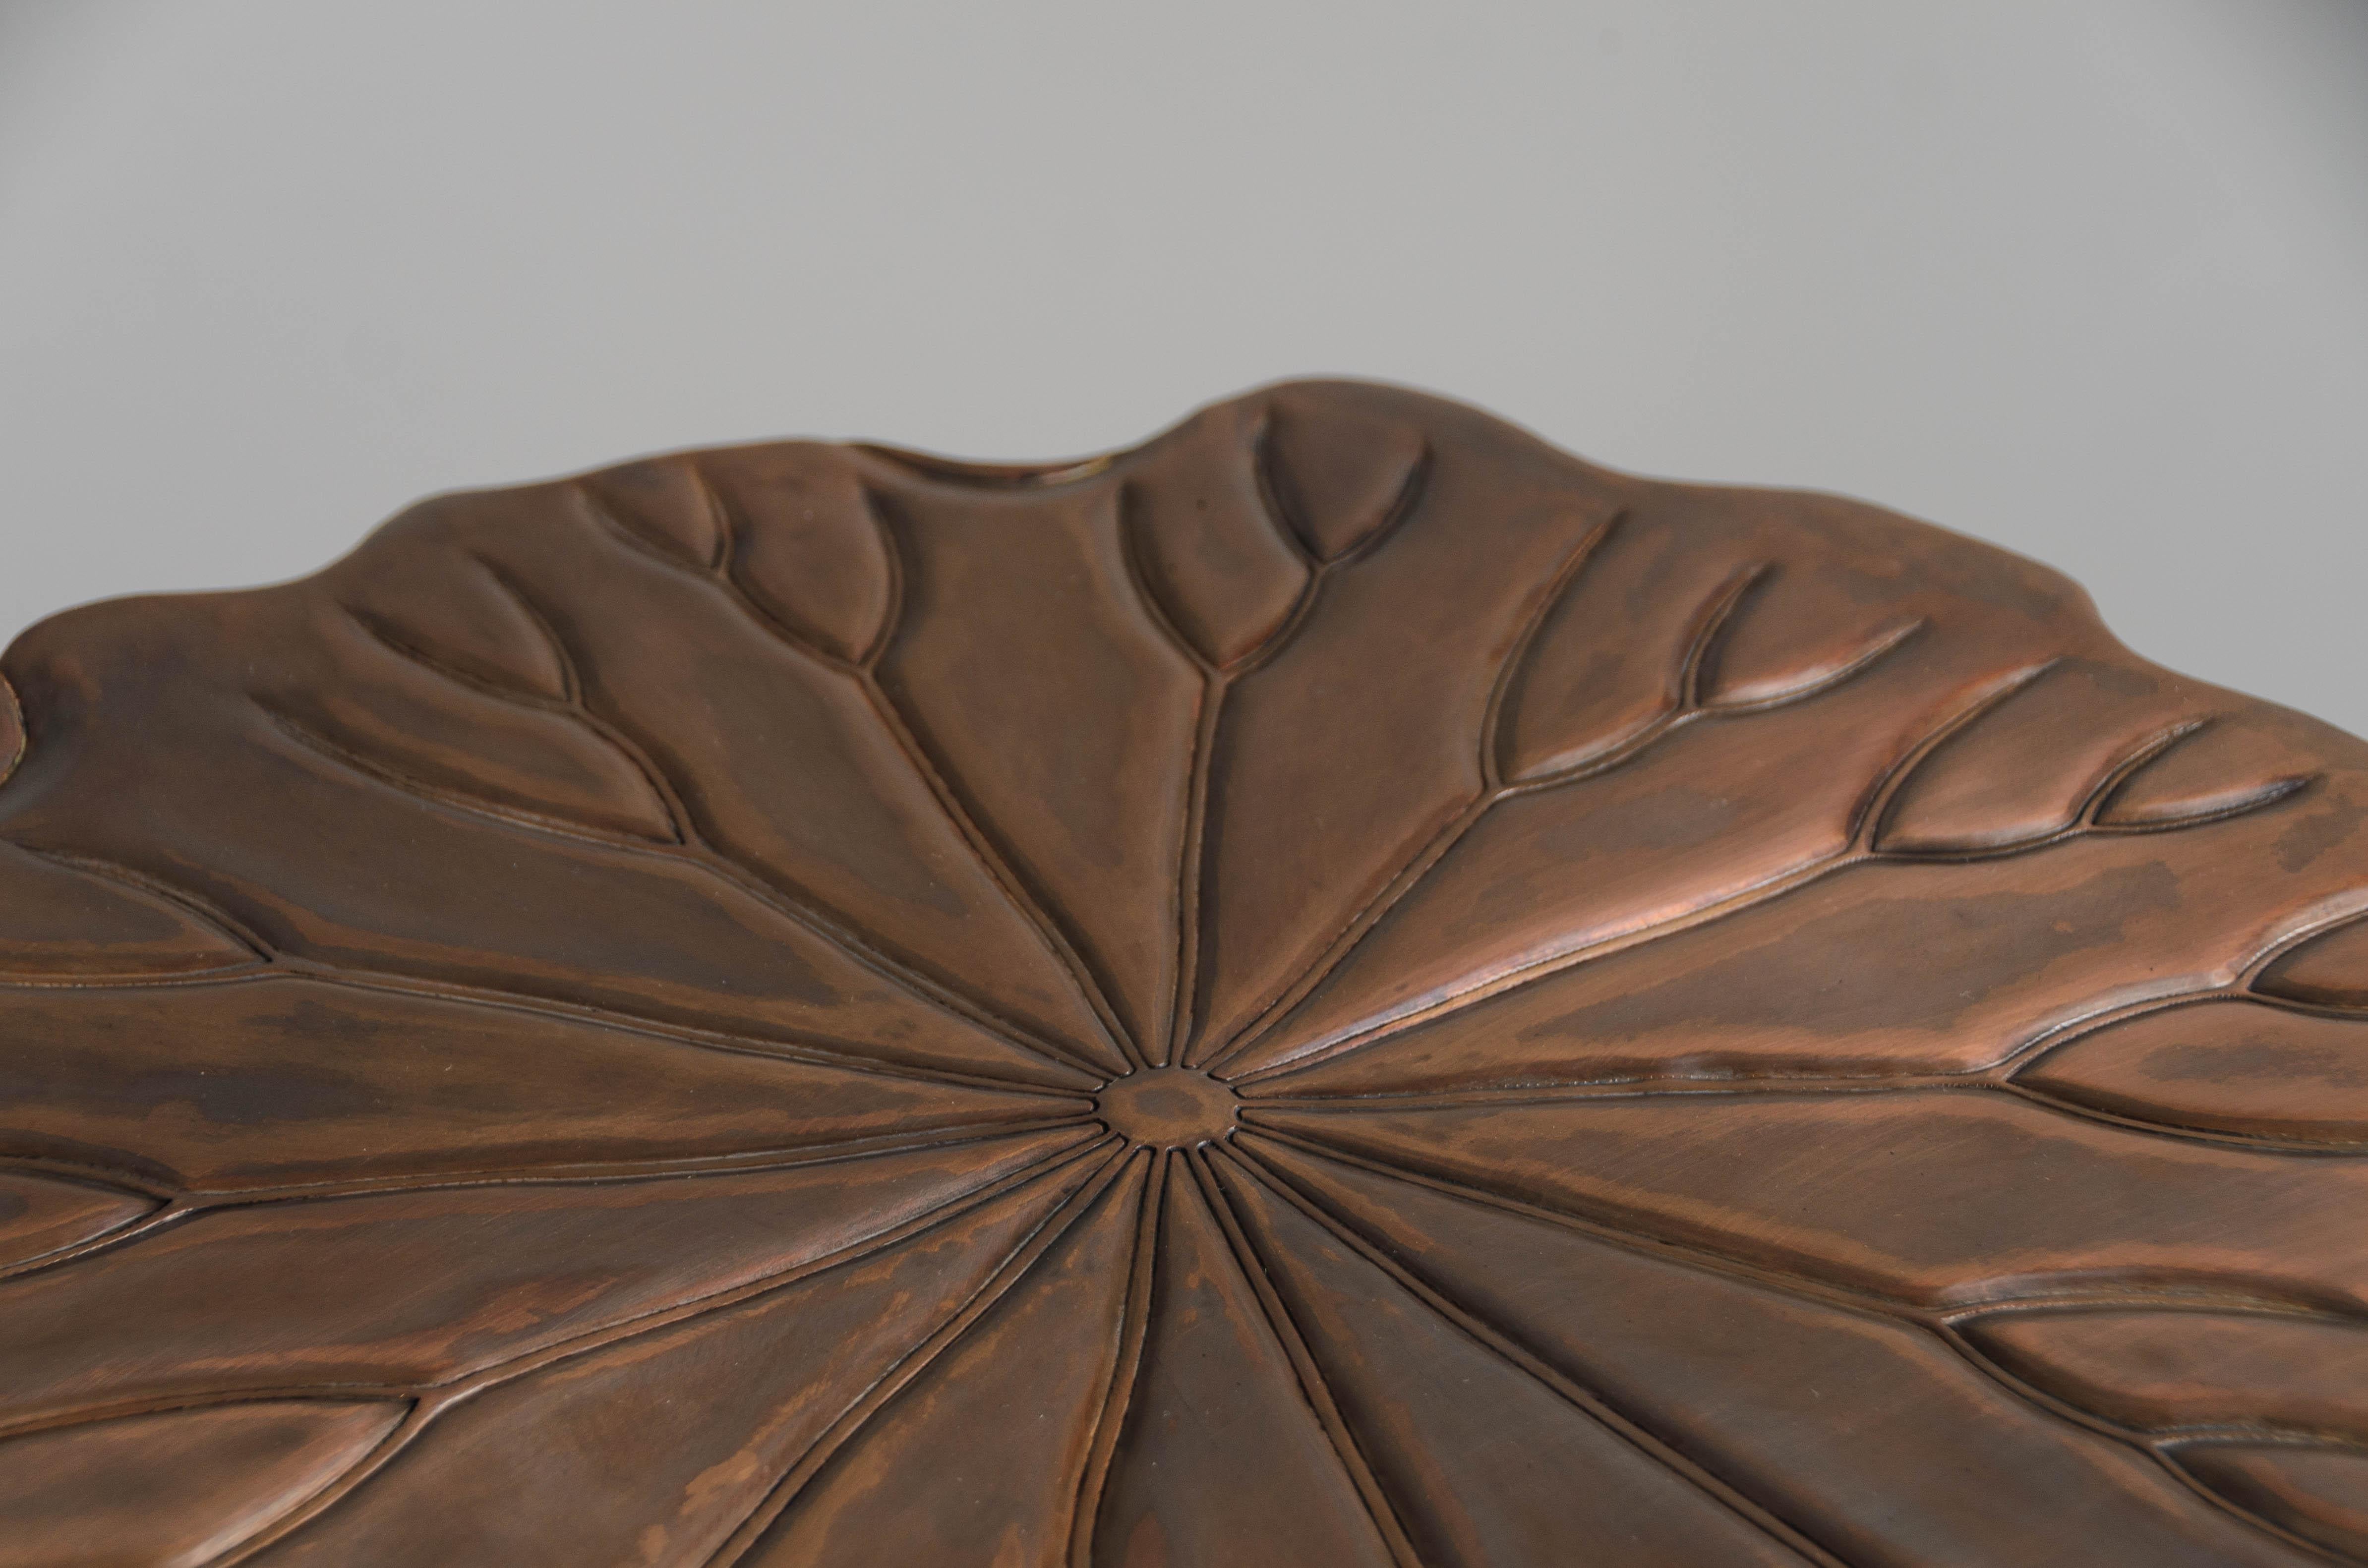 Water Lily Table in Antique Copper by Robert Kuo, Contemporary, Limited Edition For Sale 1